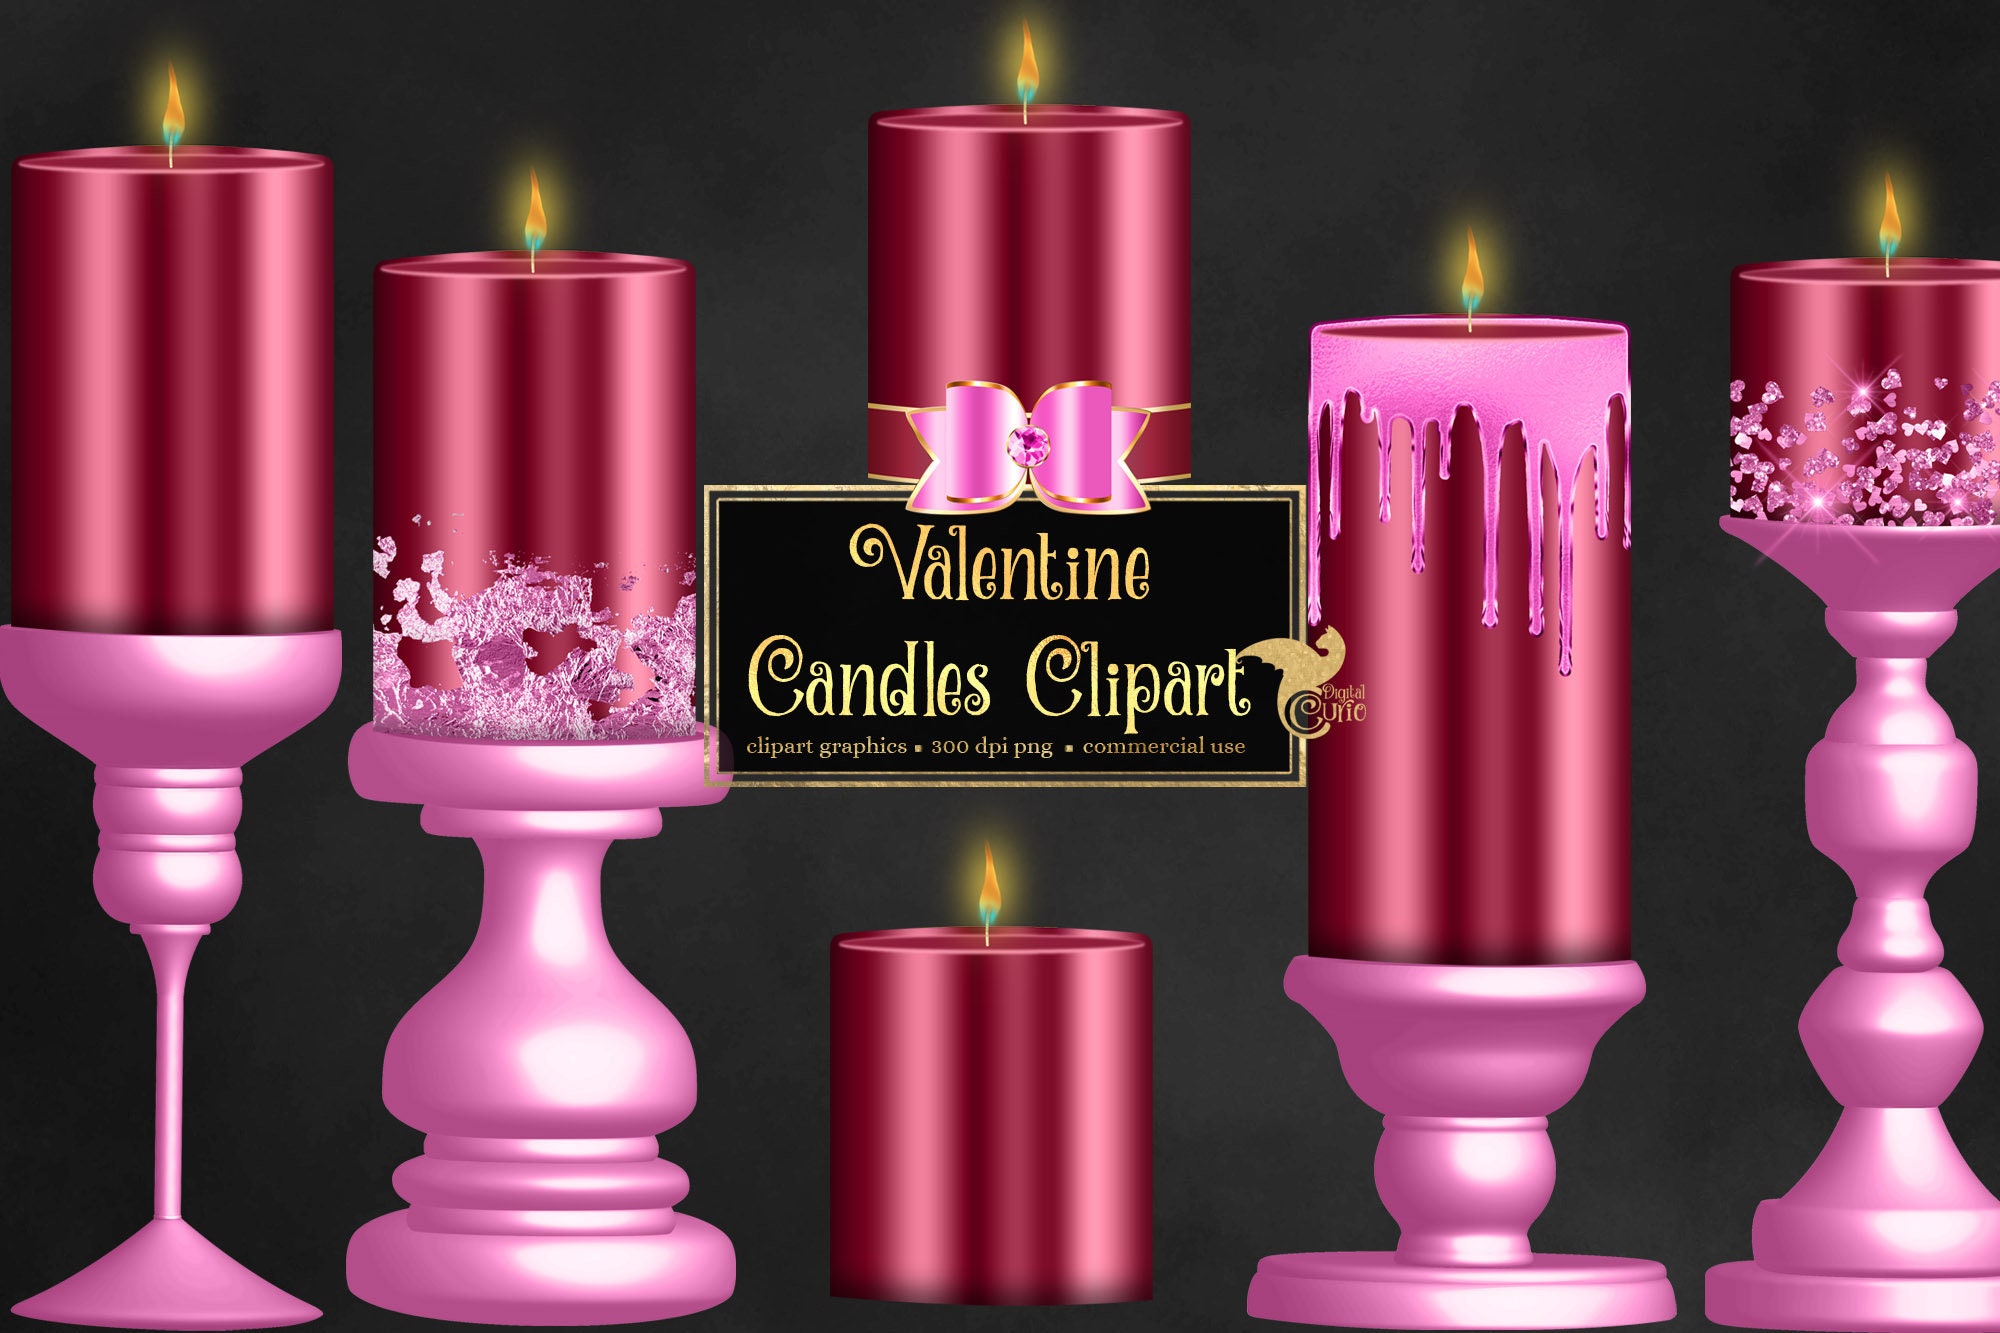 Valentine Candles Clip Art Digital Candle Graphics in Pink and